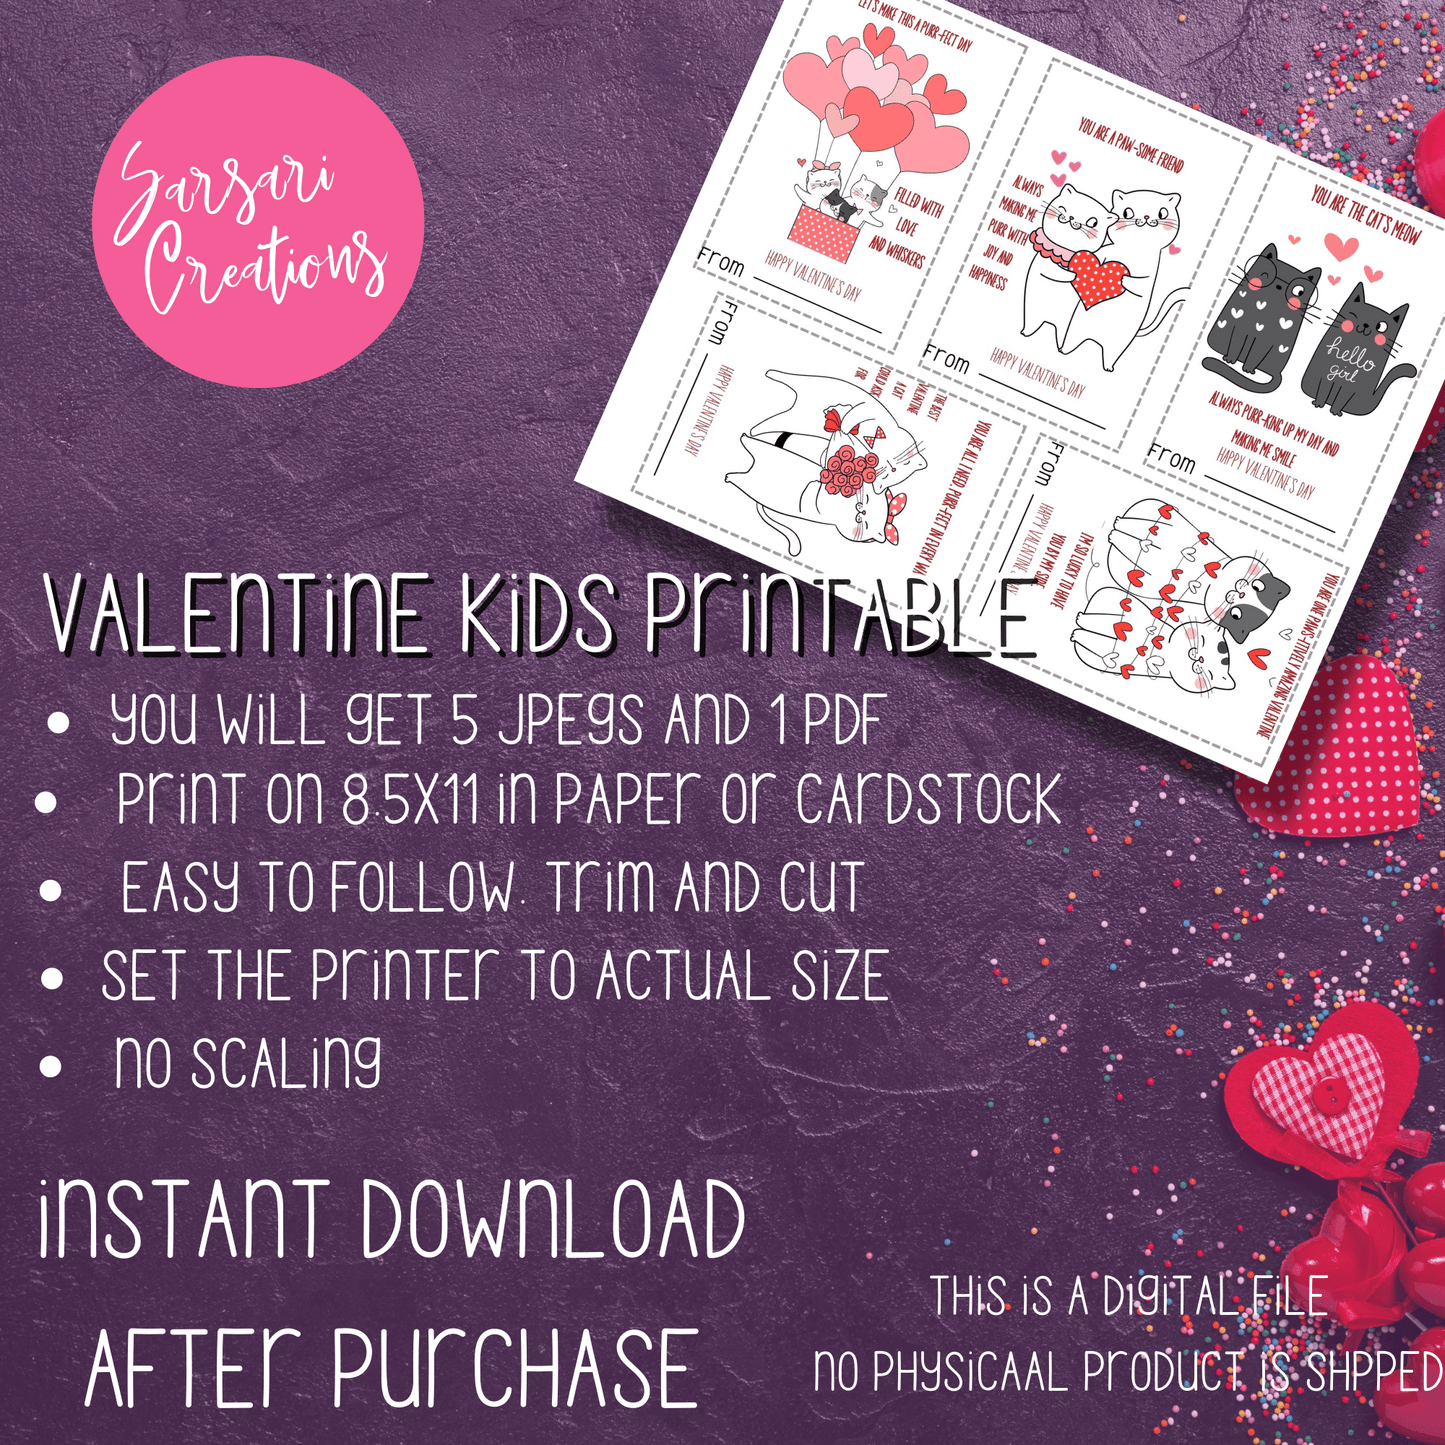 Buy 2023 Kitten Love Valentine's Day Printable: Classroom Cards, Gift Tags (Instant Download)